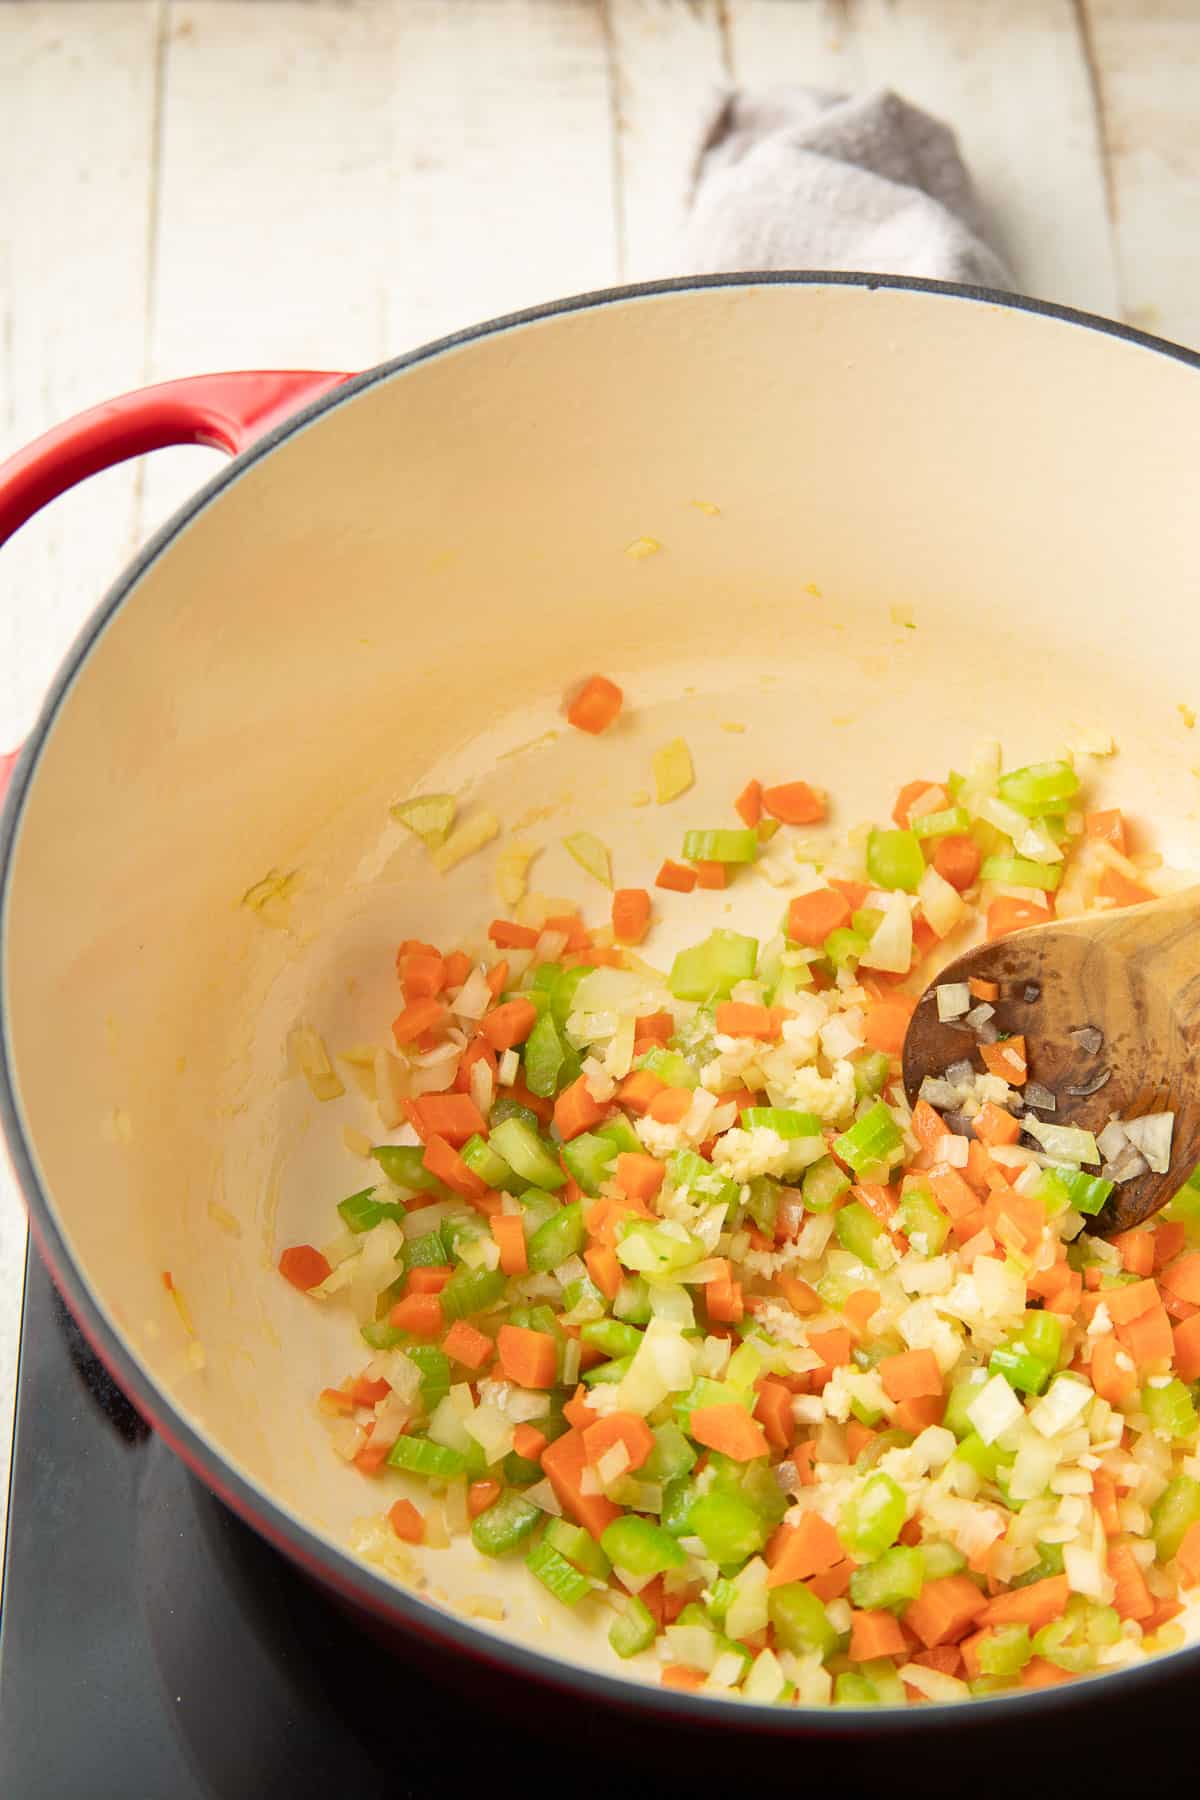 Chopped celery, carrots, onion, and garlic cooking in a pot.